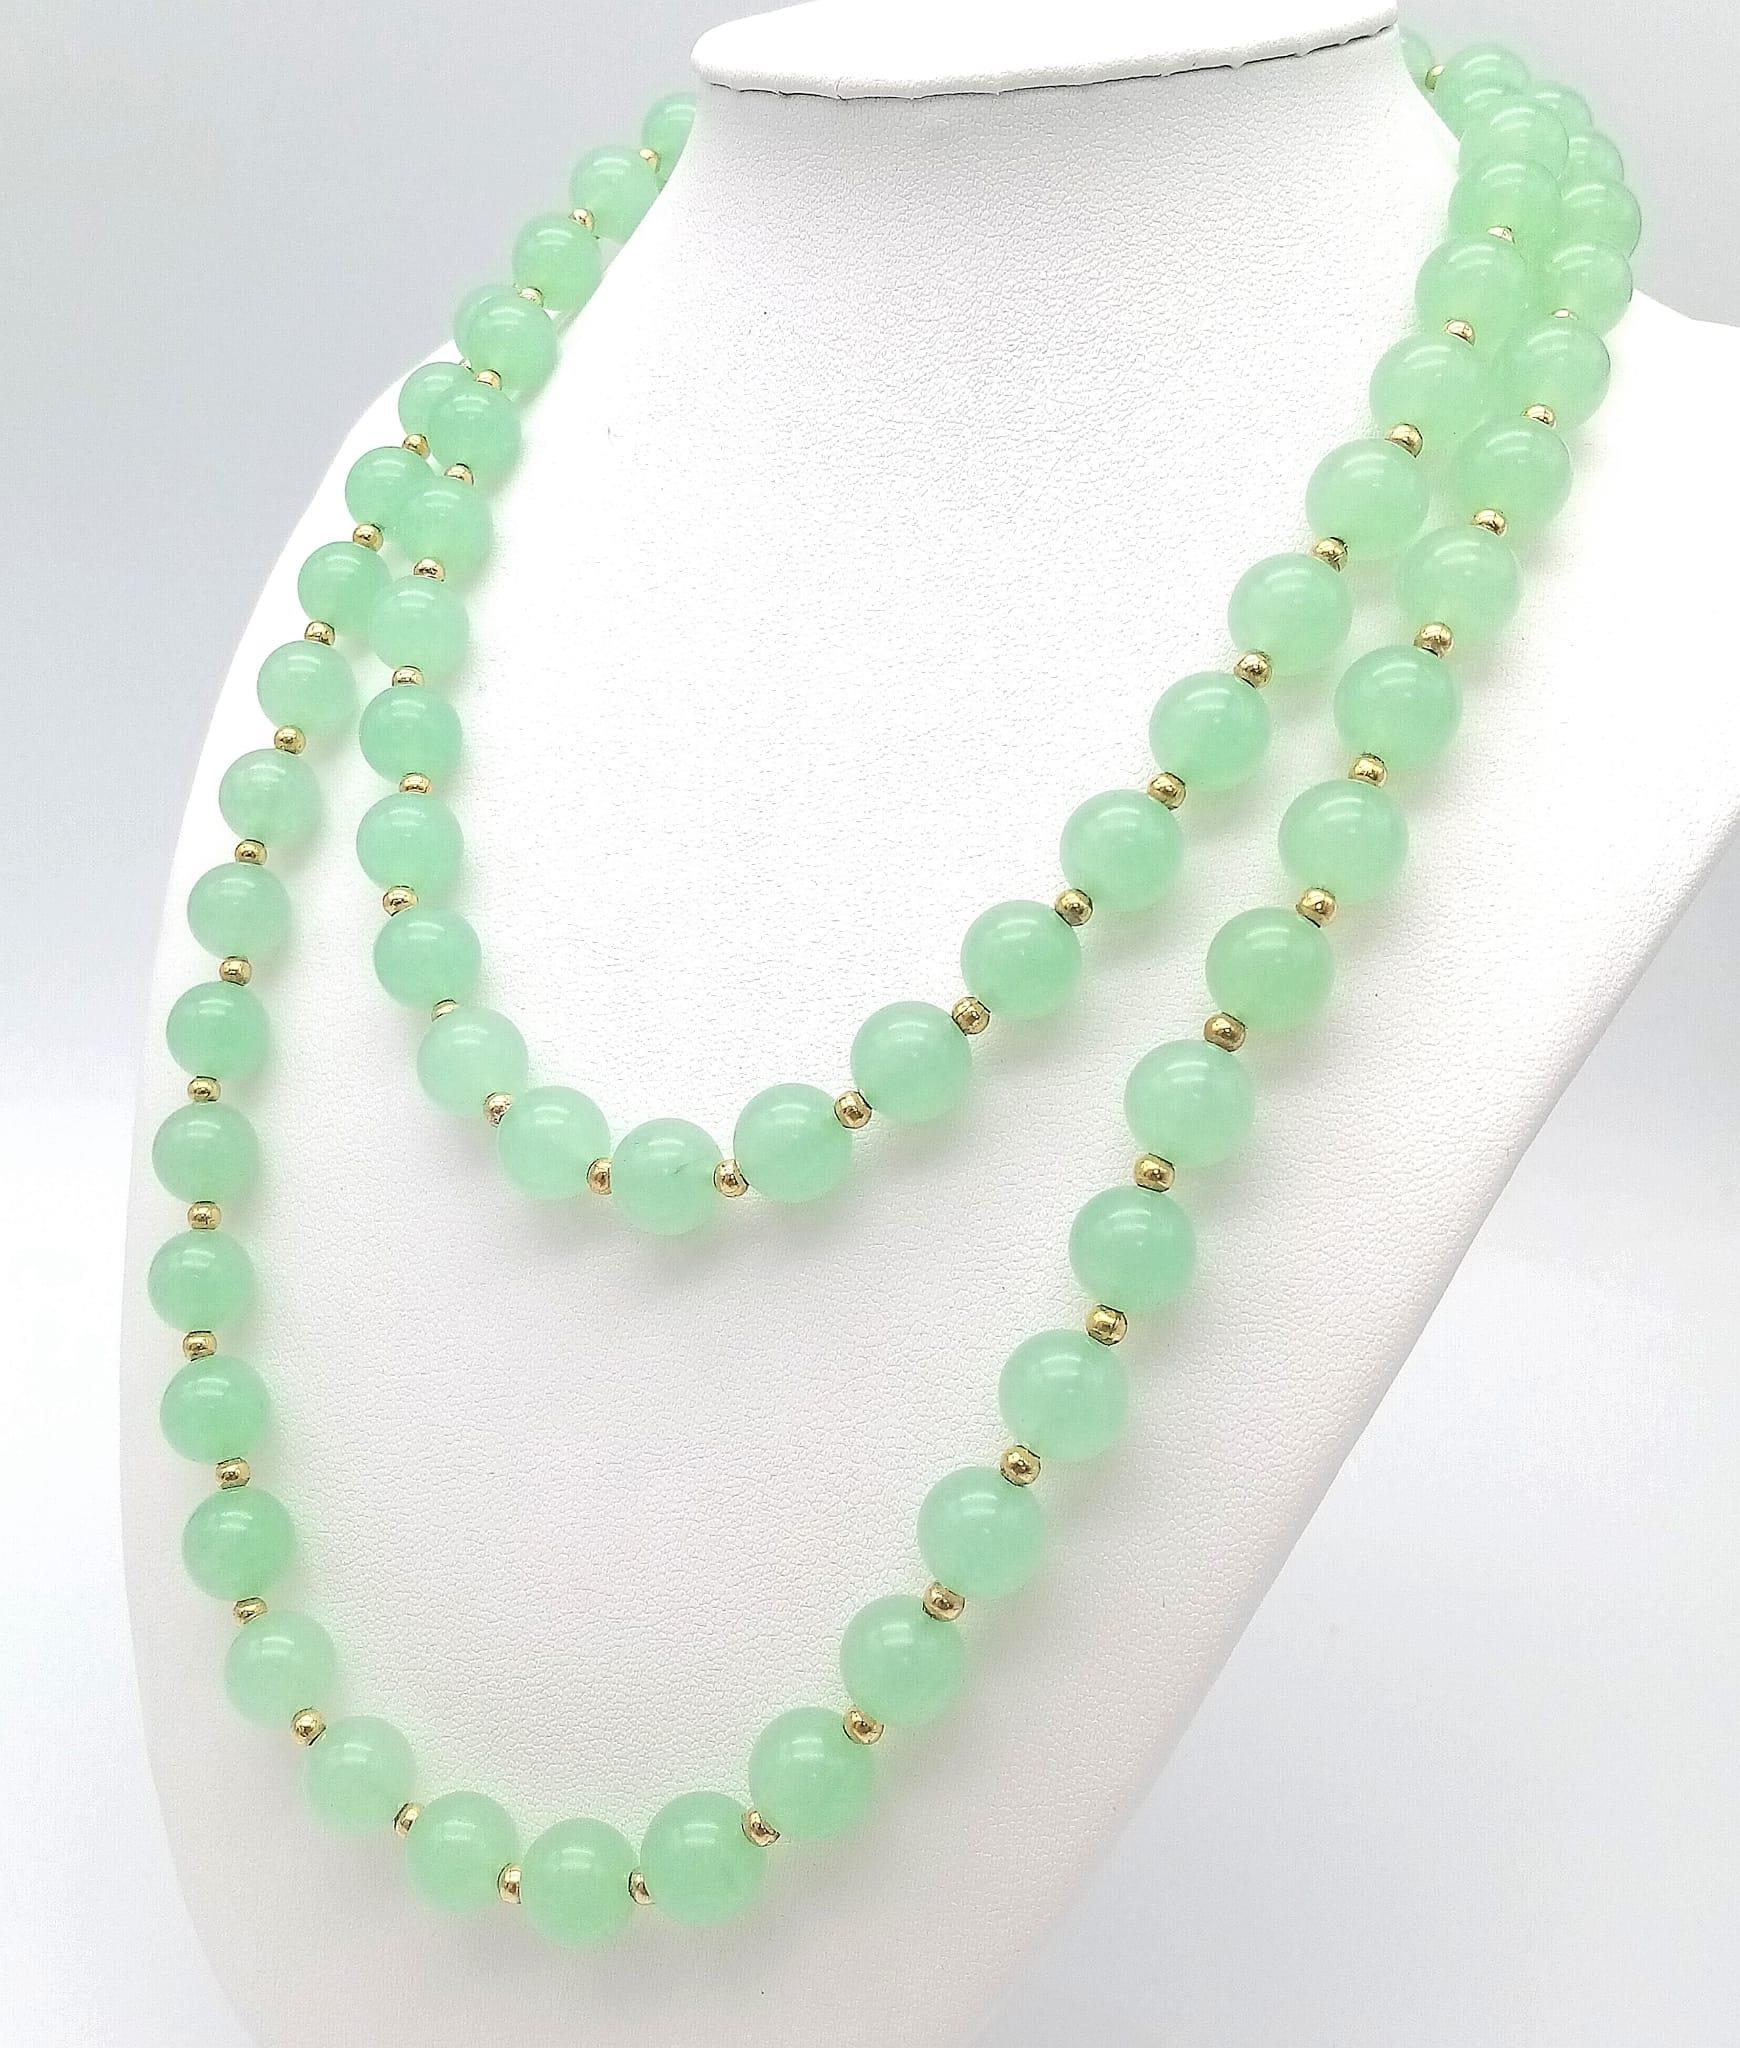 A Matinee Length Pale Green Jade Beaded Necklace. 10mm beads. Gilded spacers and clasp. 90cm